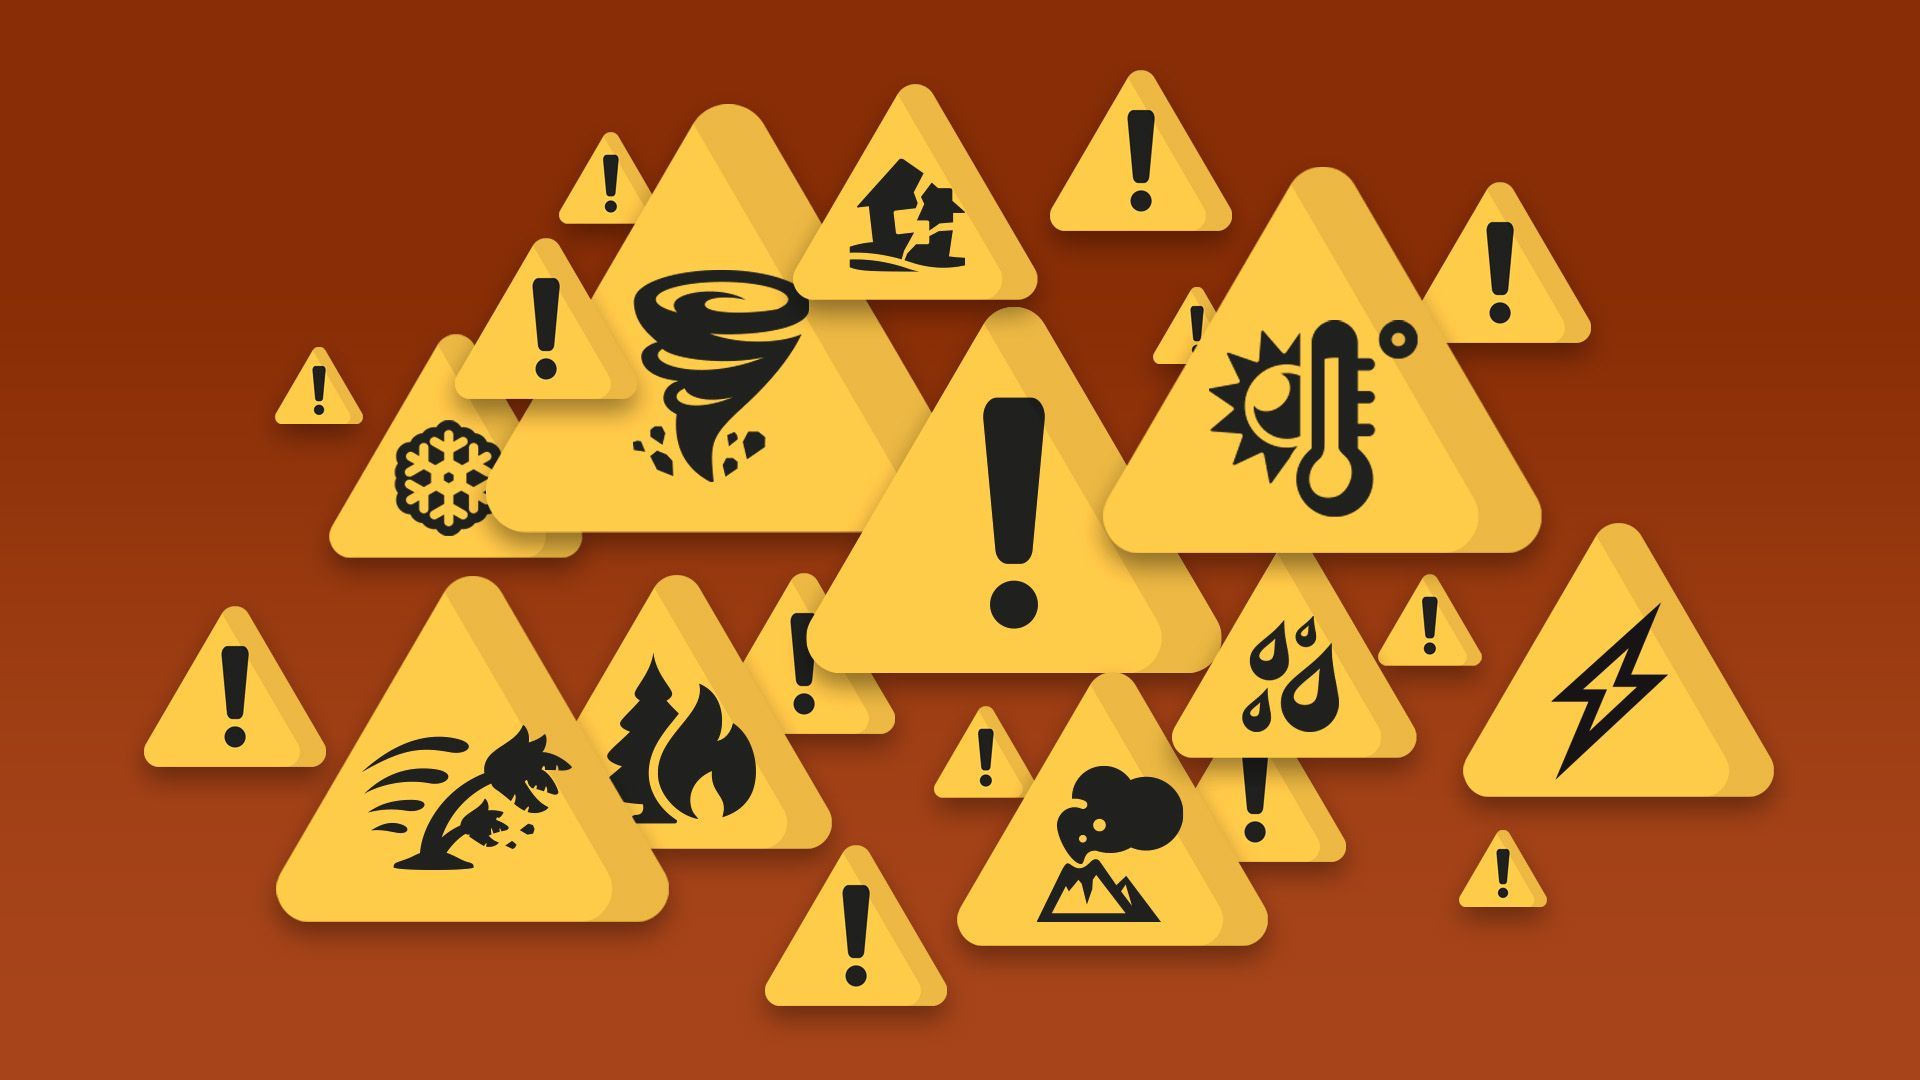 Illustration of overlapping caution icons with exclamation points and severe weather imagery